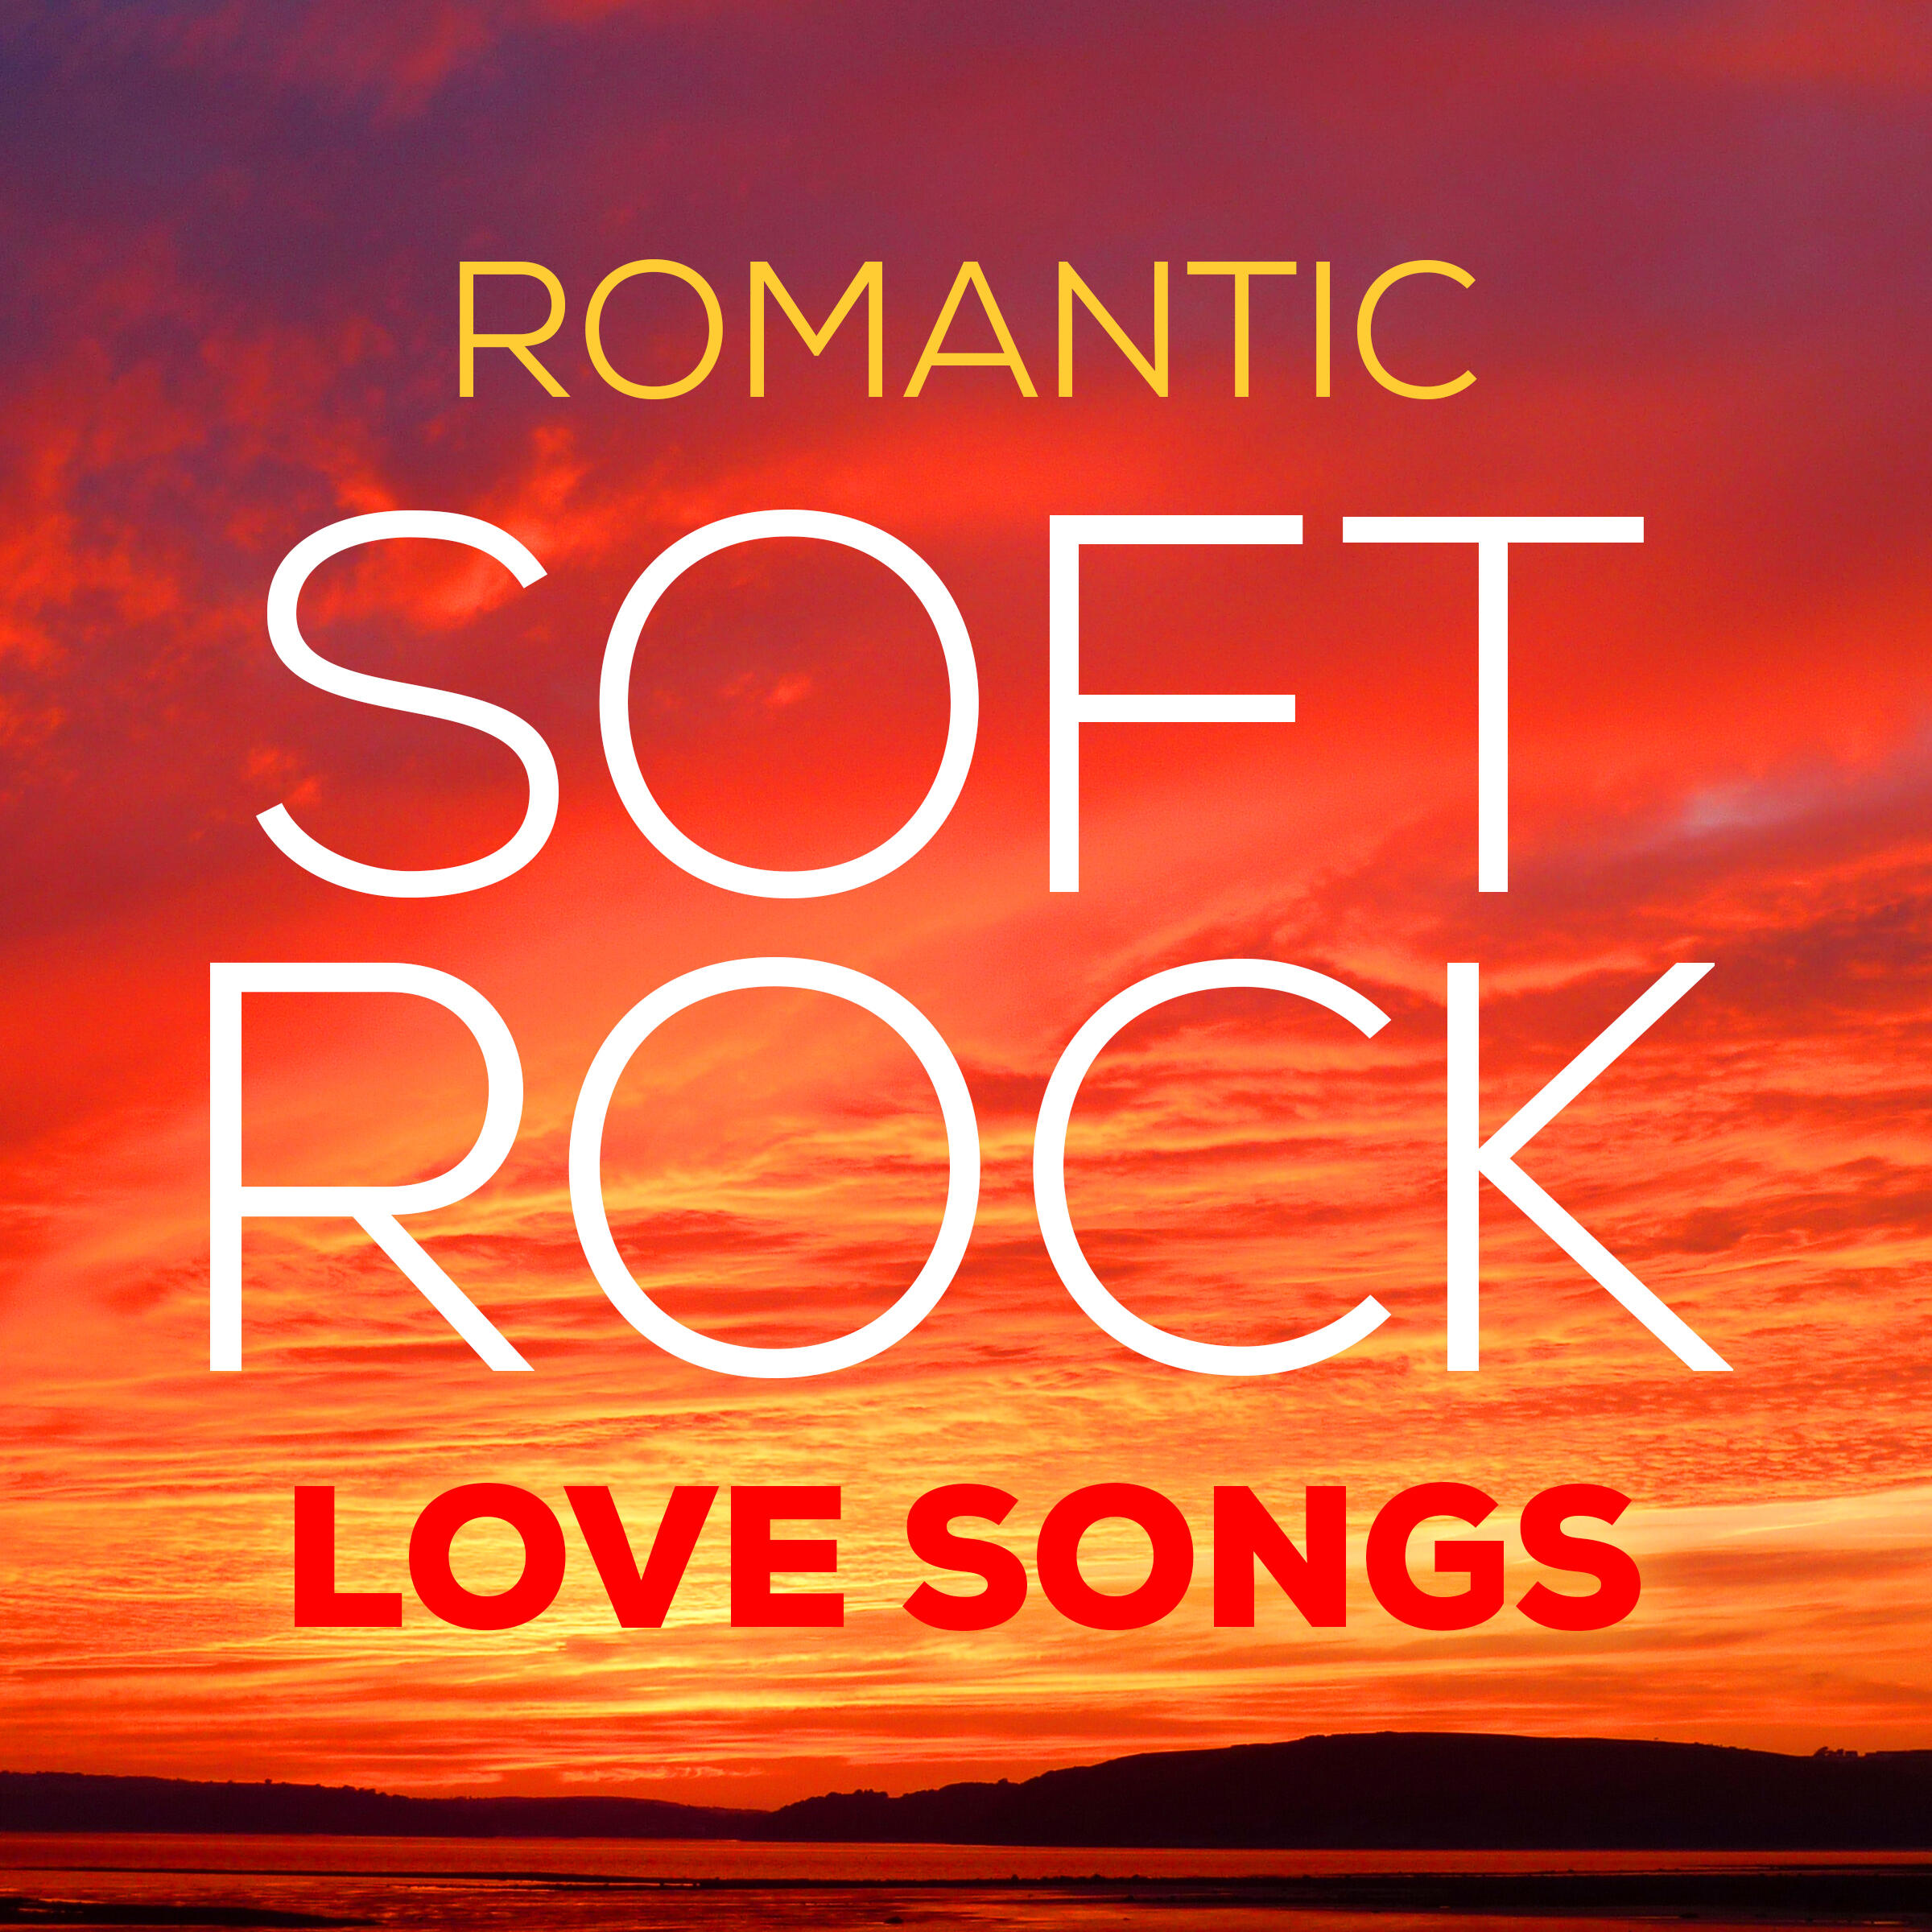 L.A Band Romantic Soft Rock Love Songs iHeart